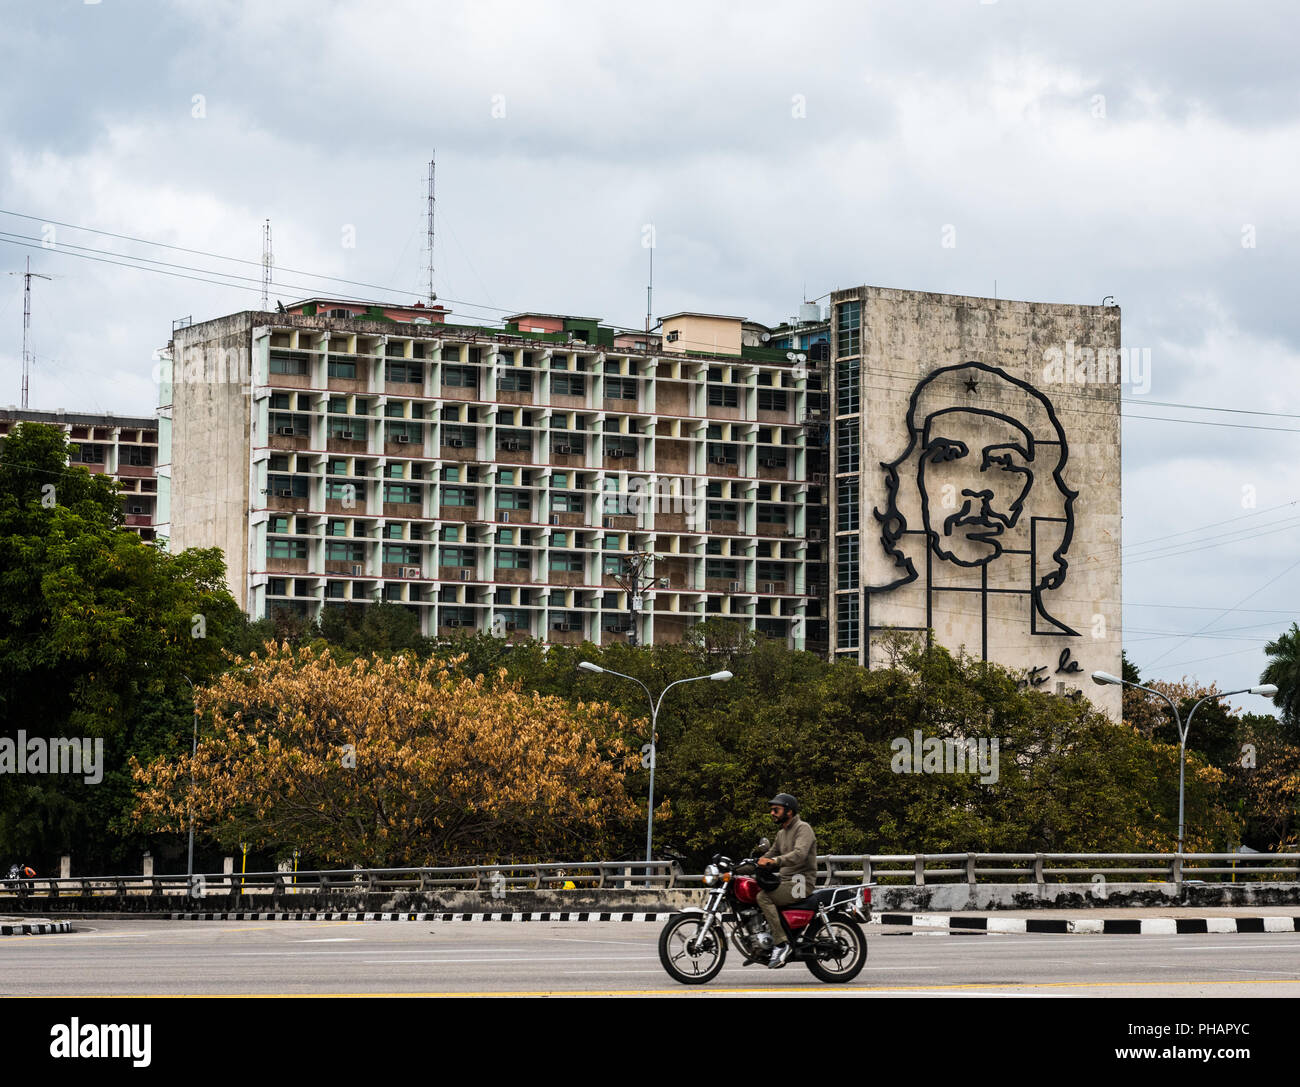 Motorcyclist passes Plaza Revolucion in Havana, Cuba where the Ministry of the Interior building sports an iron mural of guerilla leader Che Guevara. Stock Photo